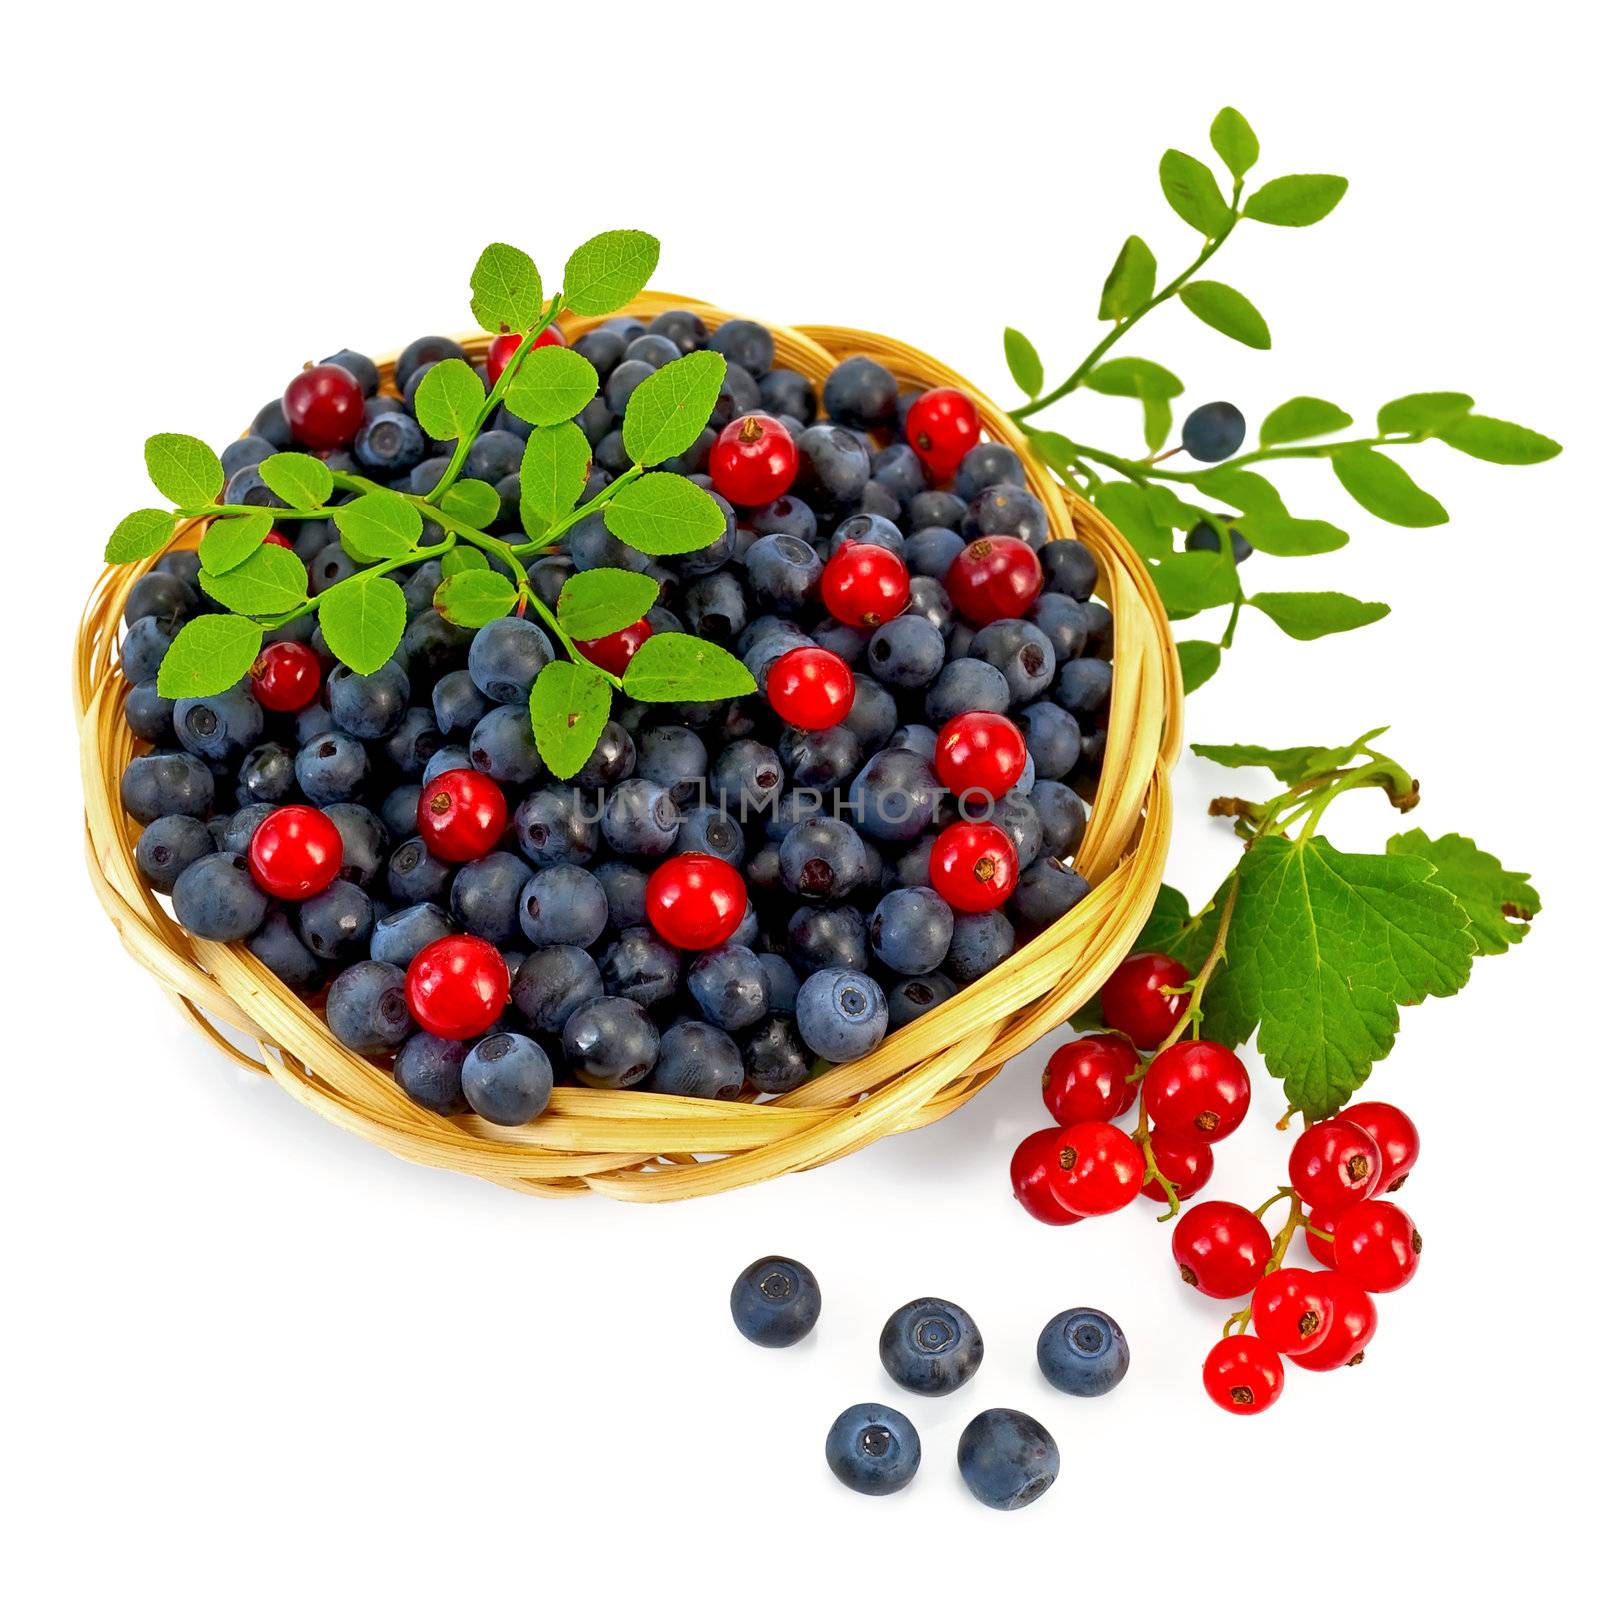 Blueberries with red currants by rezkrr